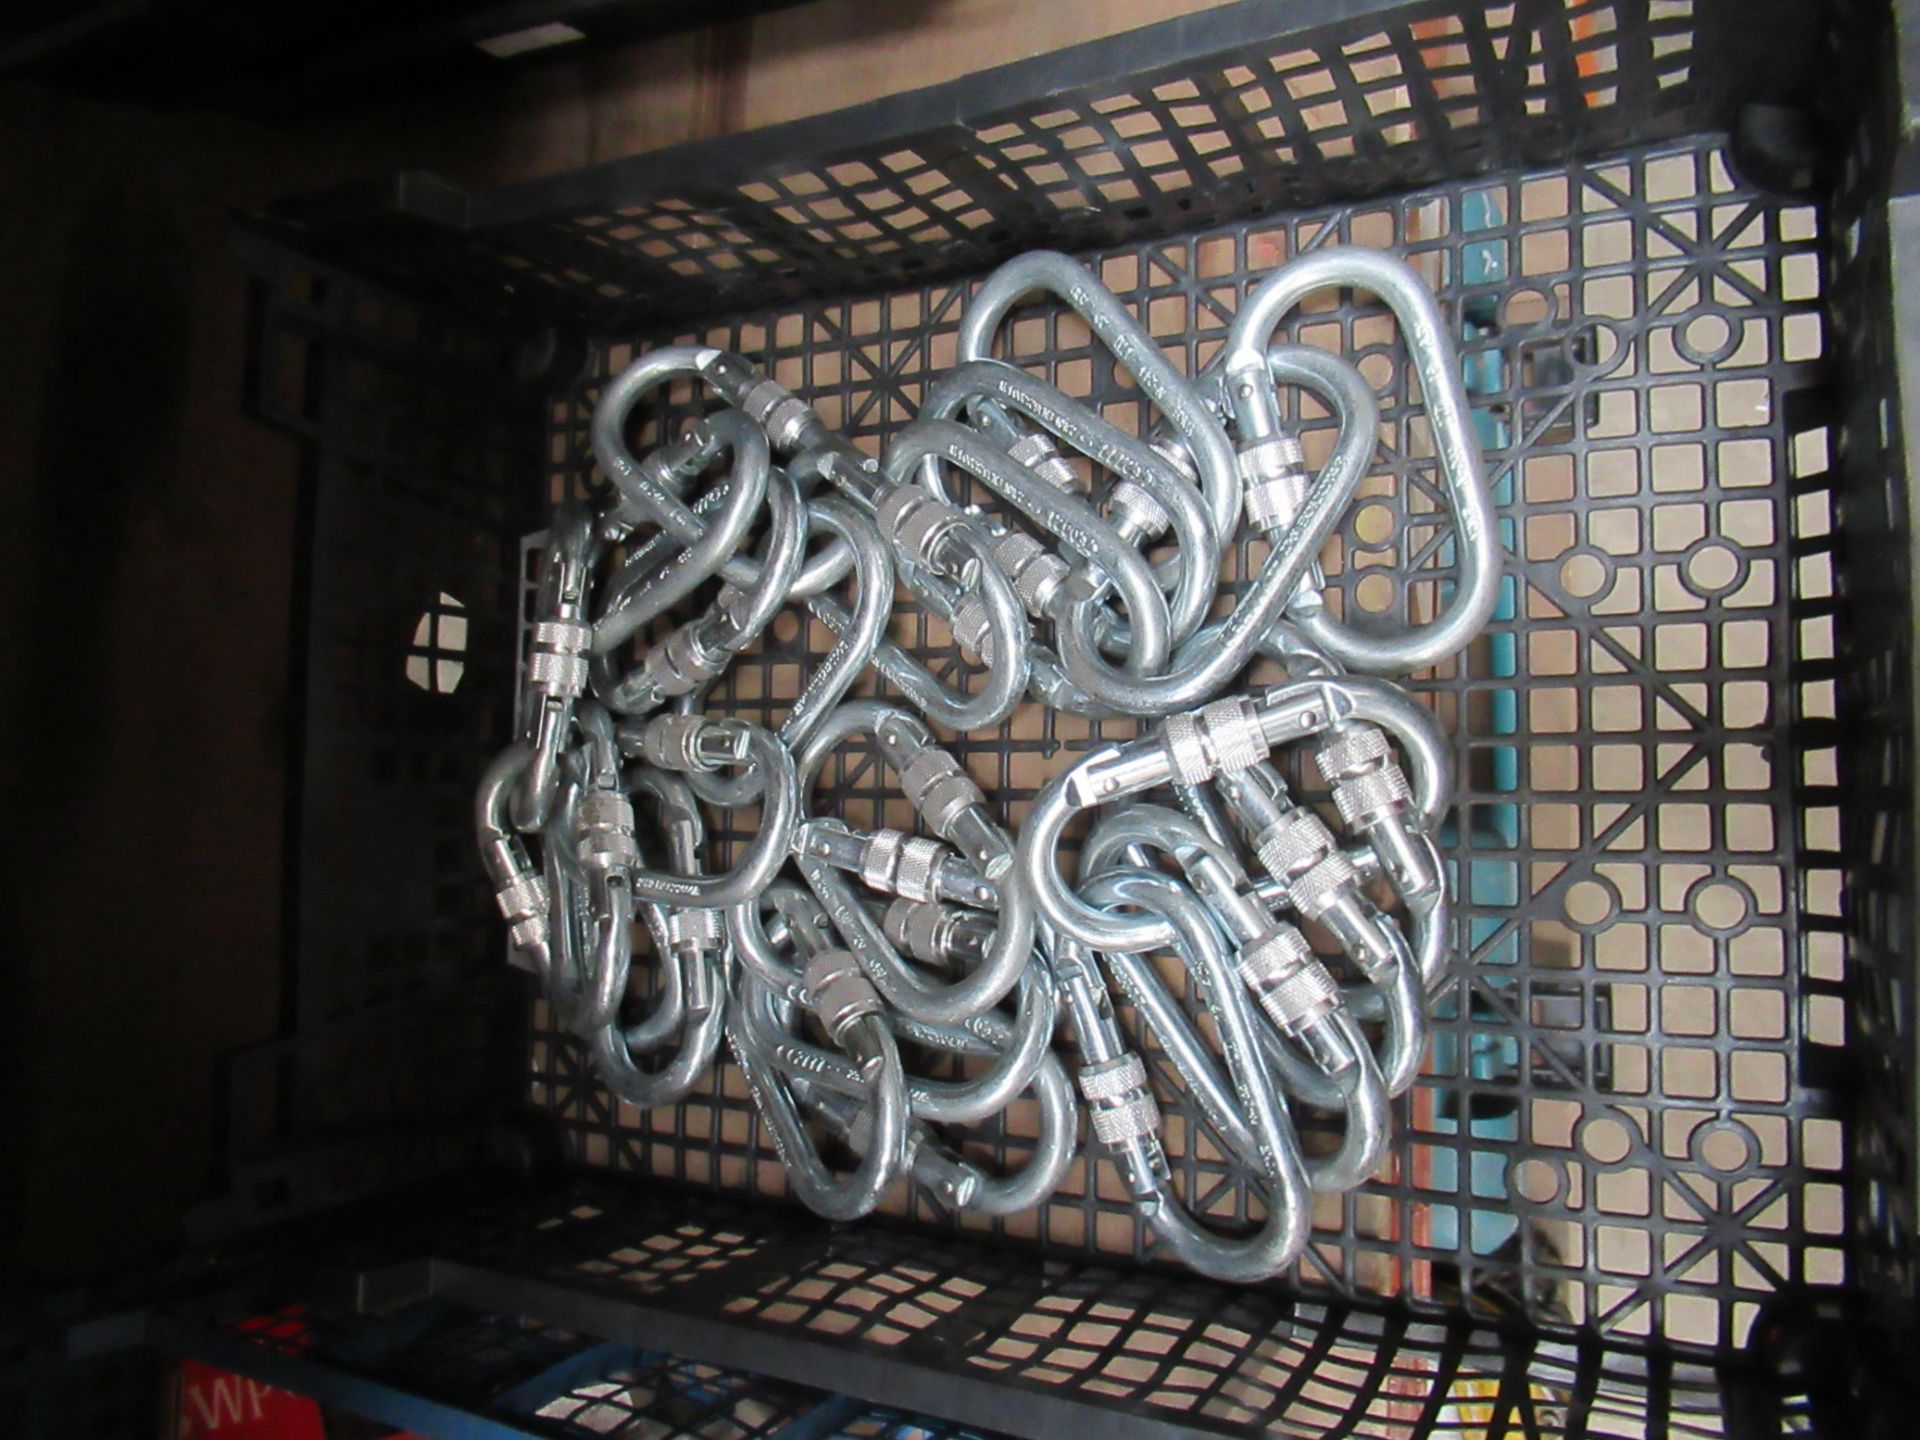 A Tray of Carabiners